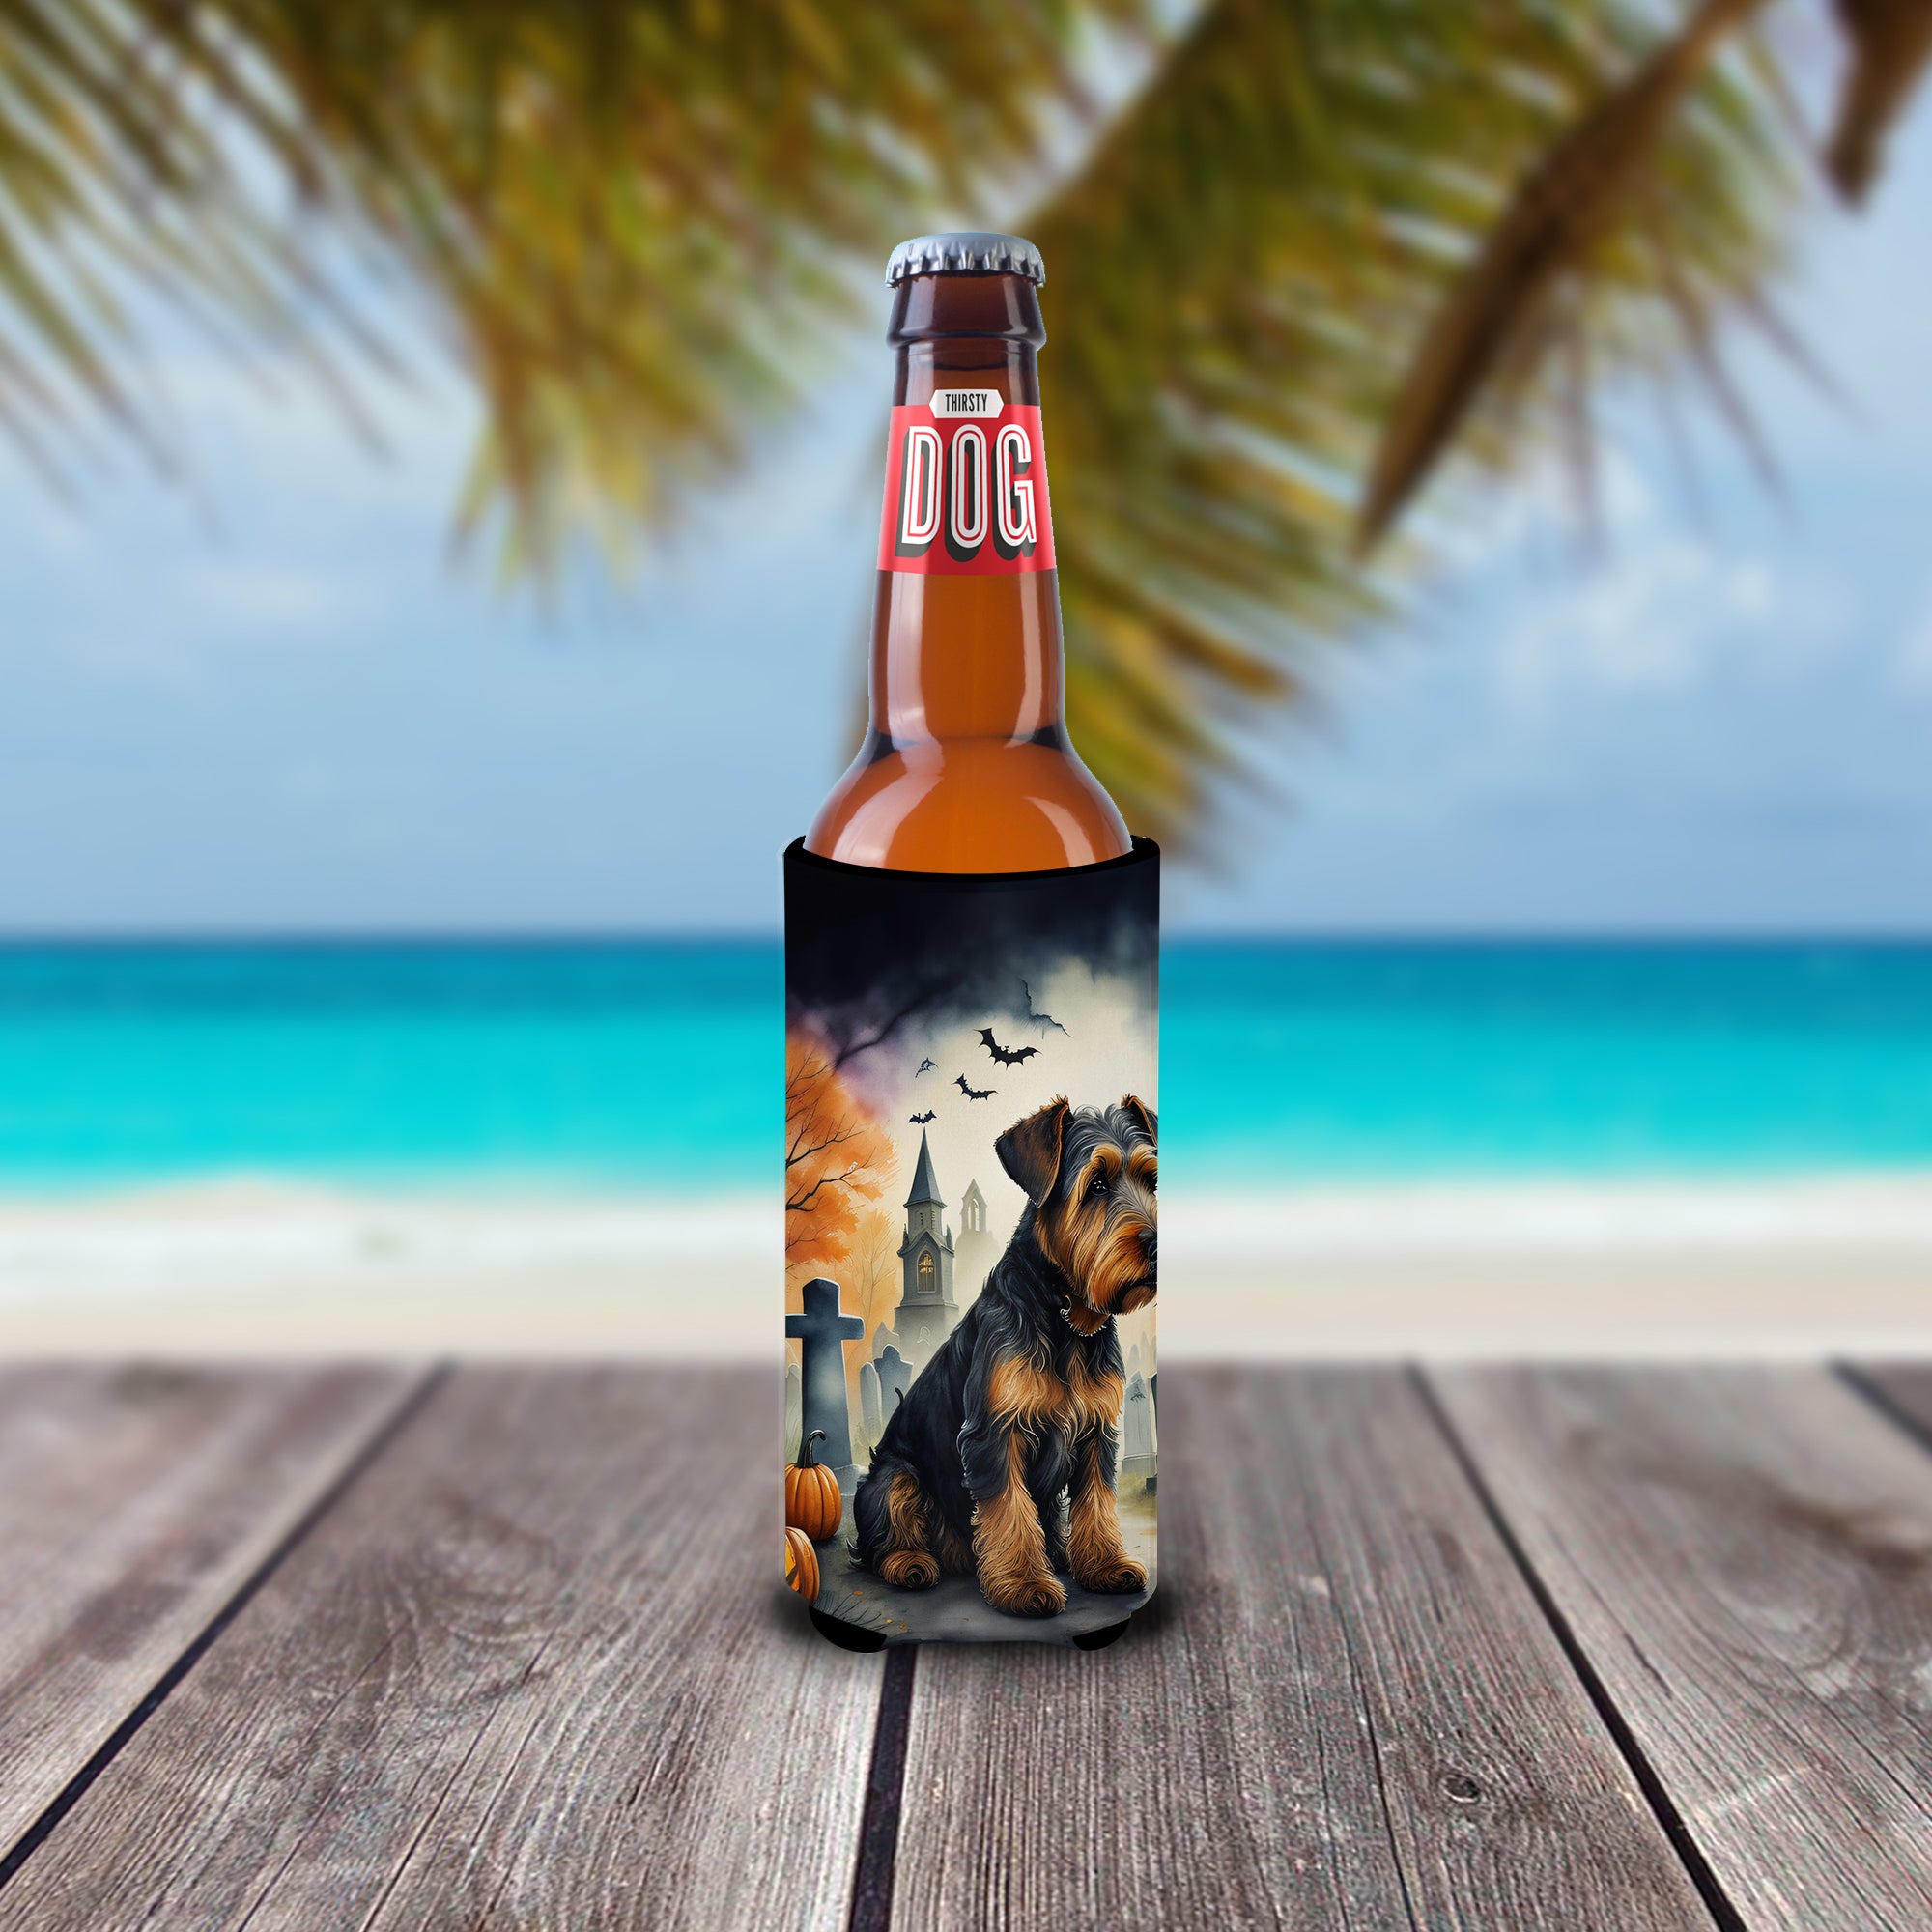 Airedale Terrier Spooky Halloween Hugger for Ultra Slim Cans